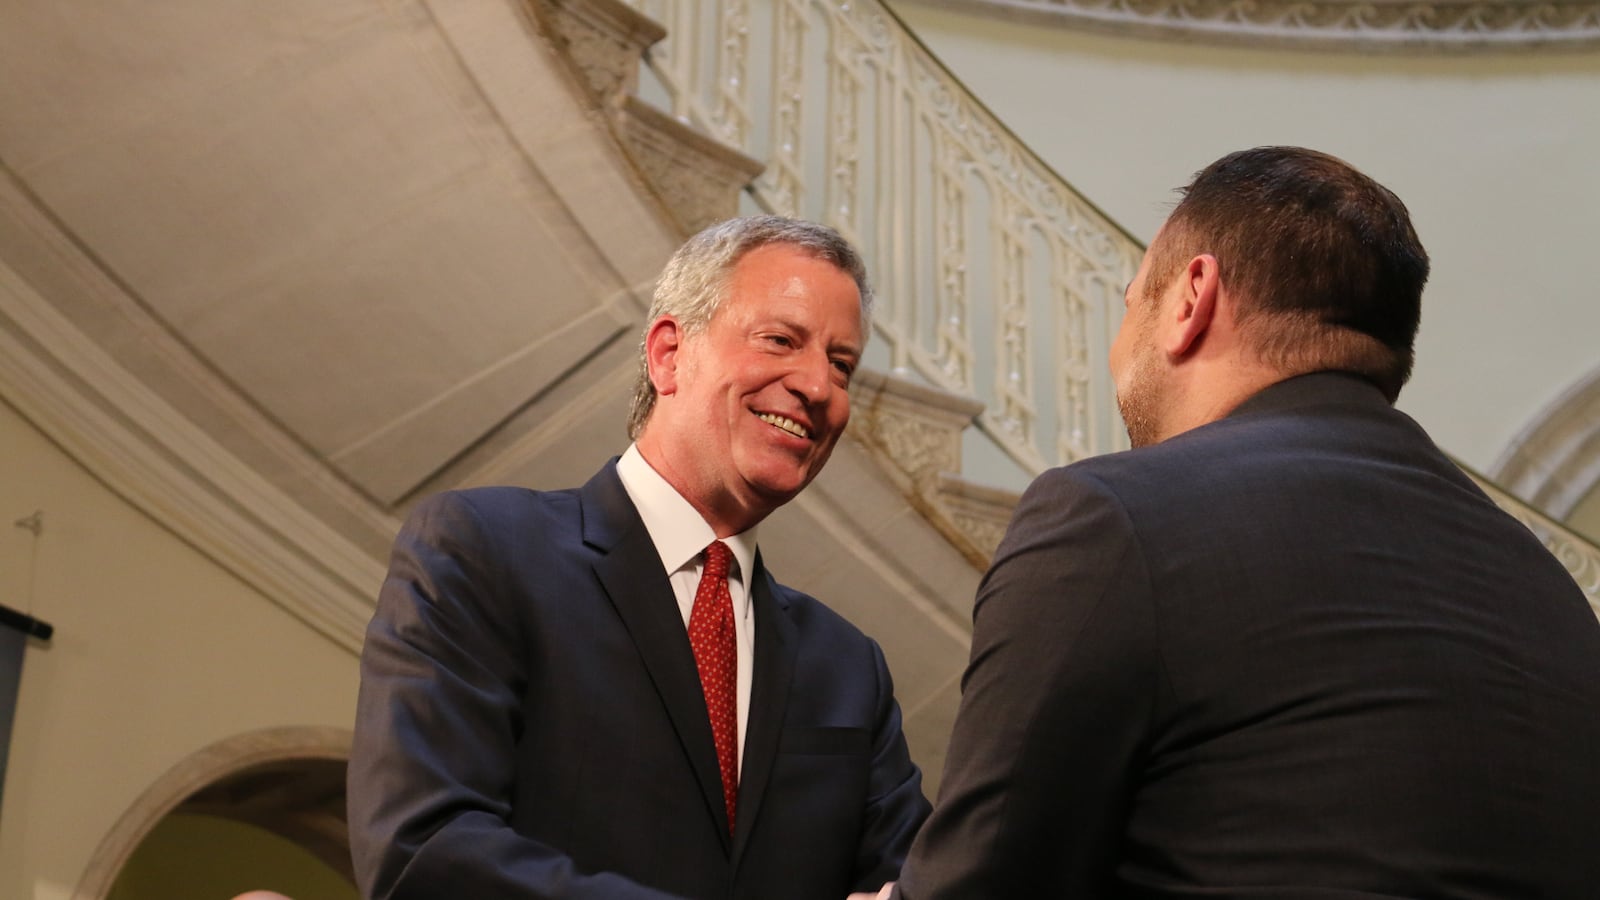 Mayor Bill de Blasio and City Council Speaker Corey Johnson reached a handshake agreement on the city's budget Friday.